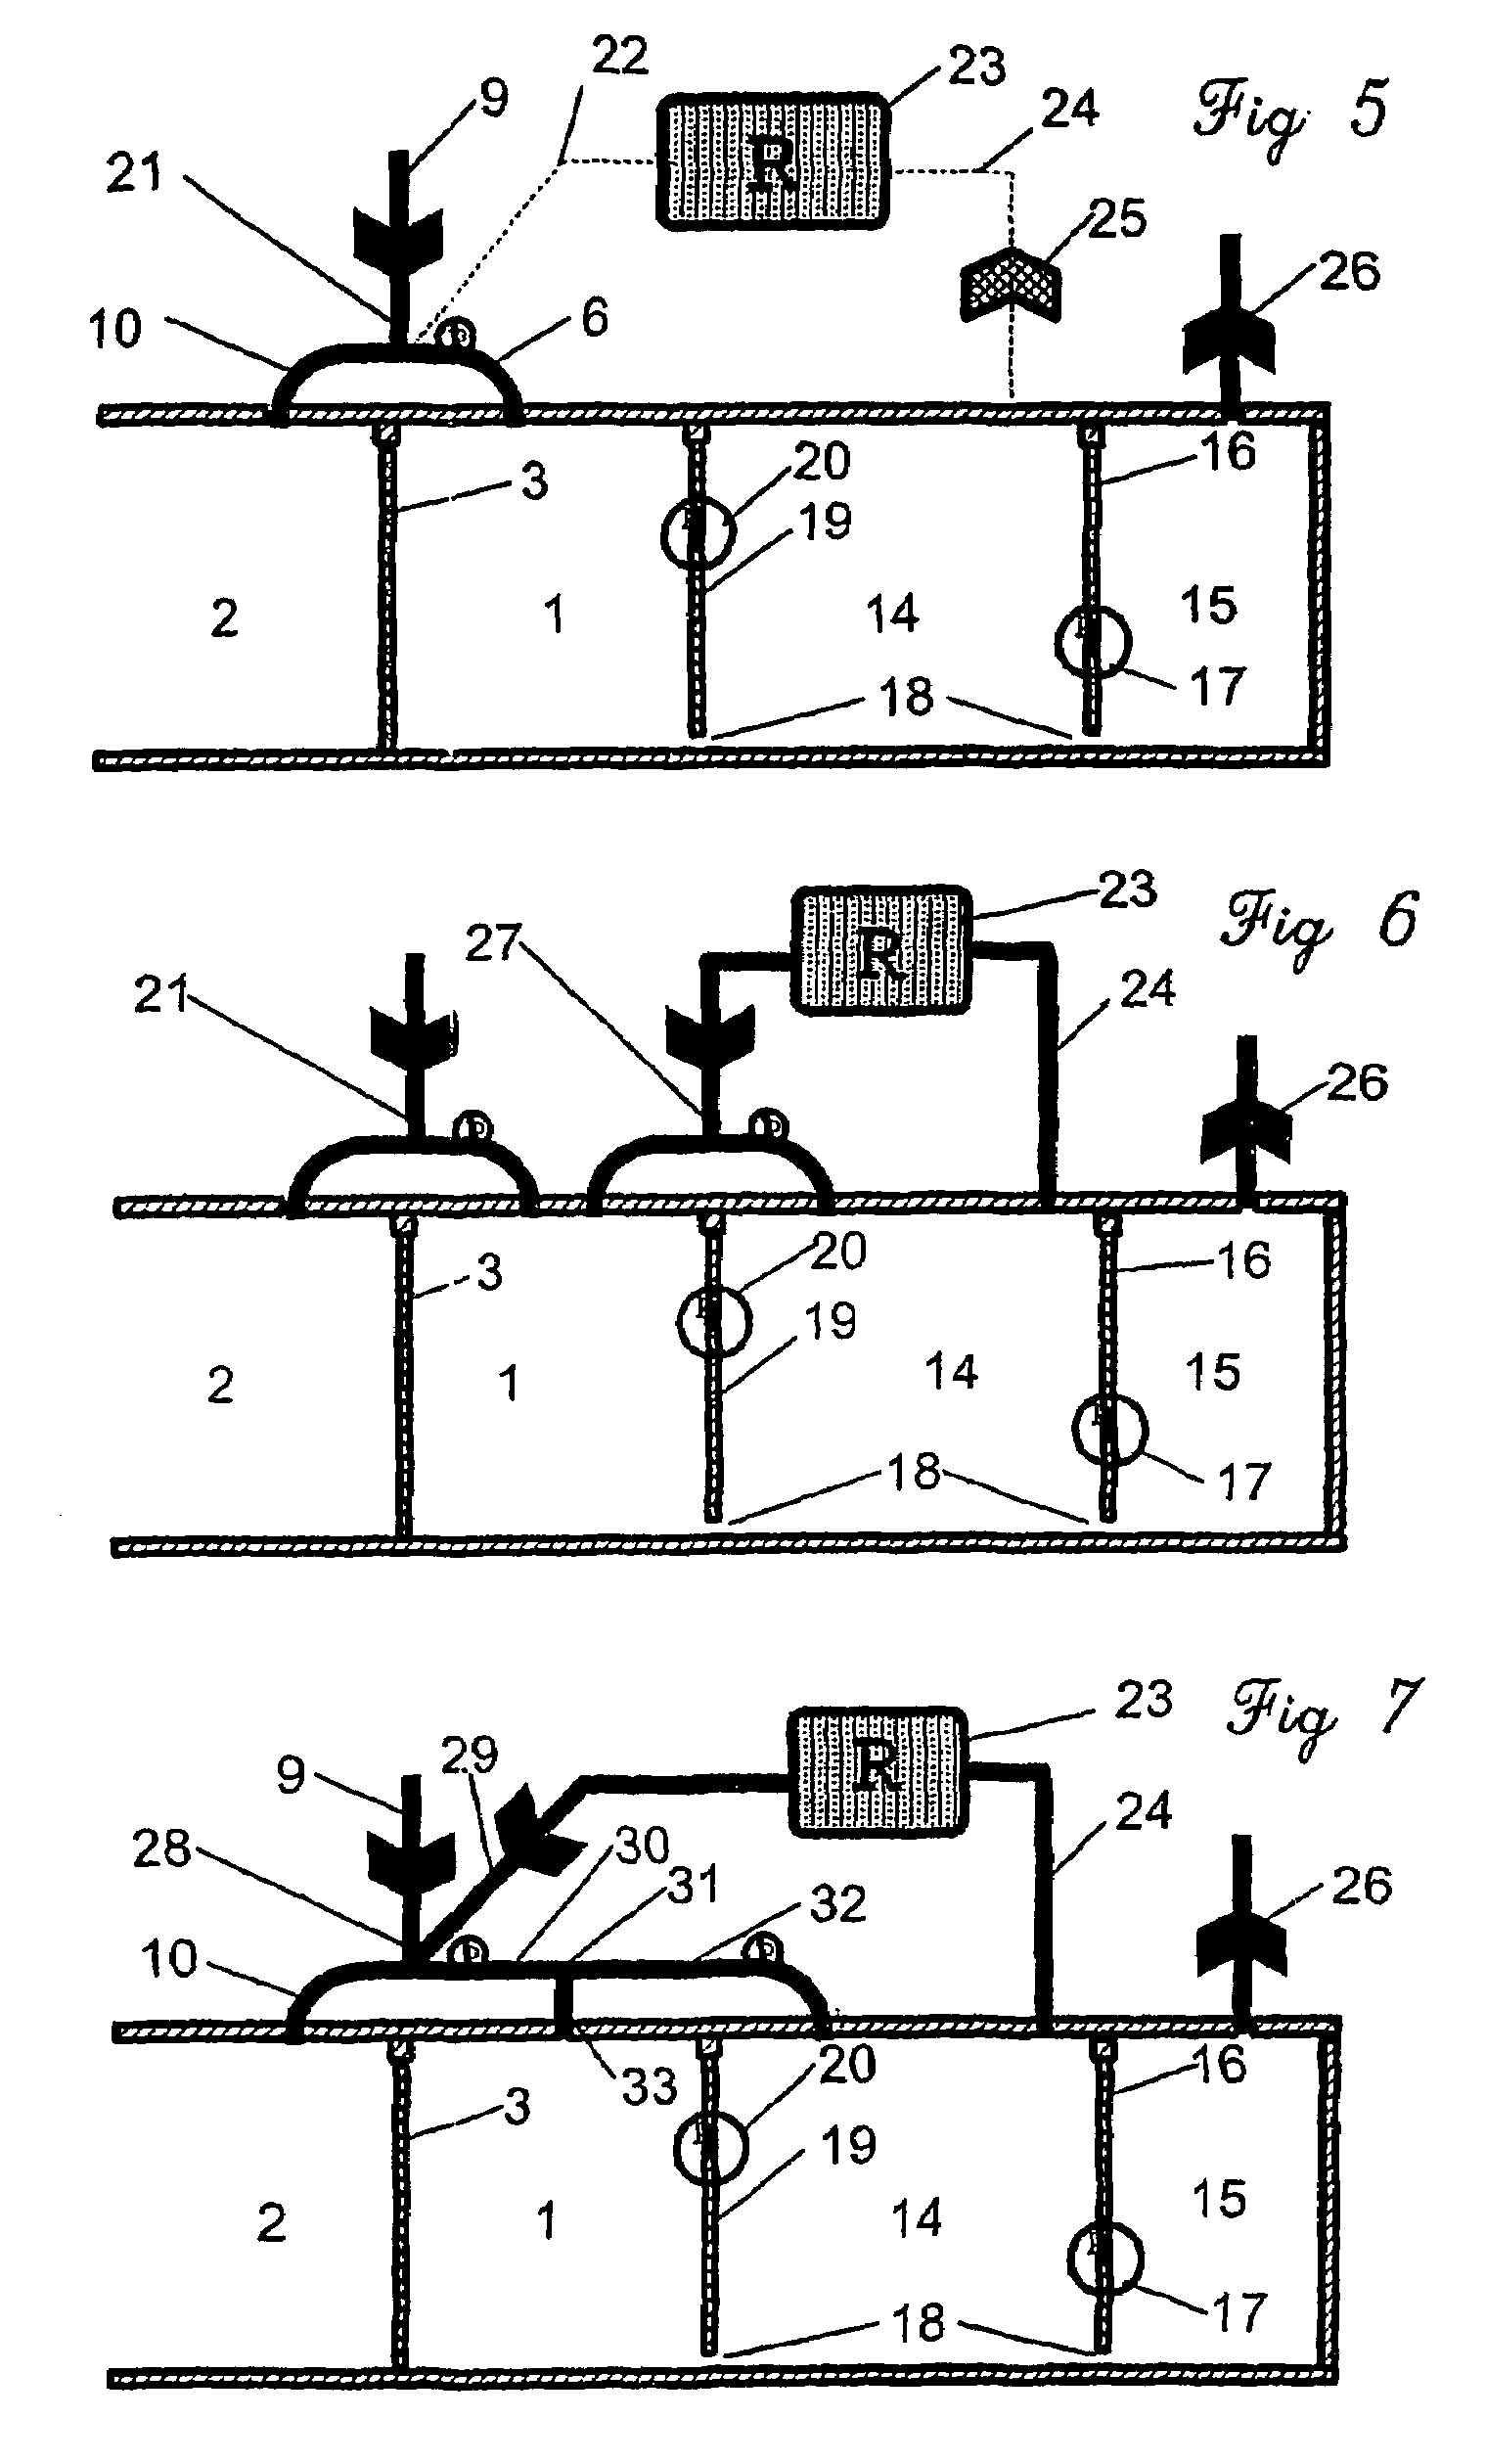 Arrangement for controlling airflow for example in clean rooms